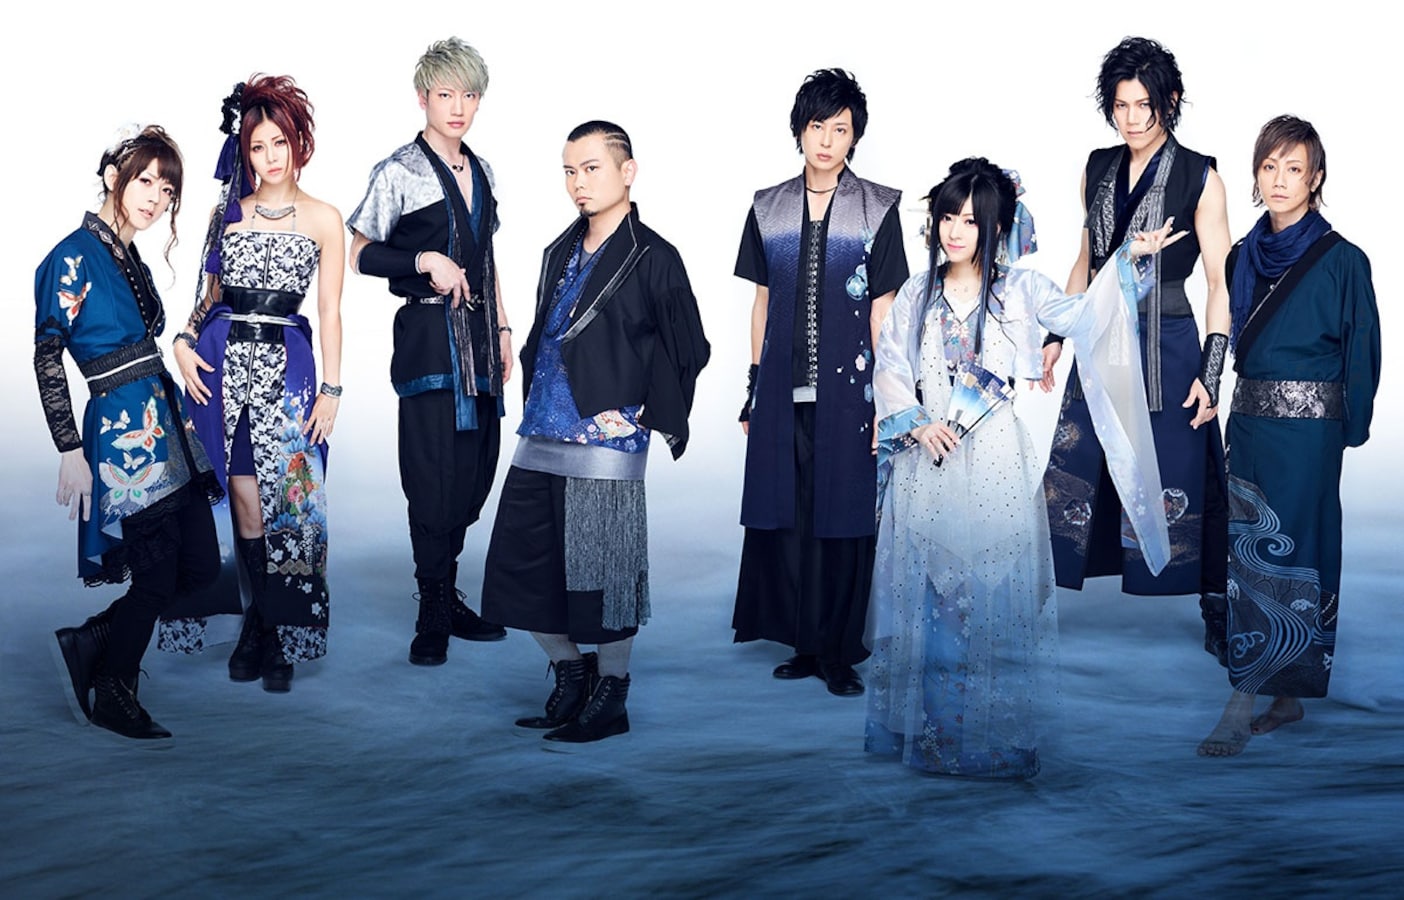 An Interview with Wagakki Band All About Japan